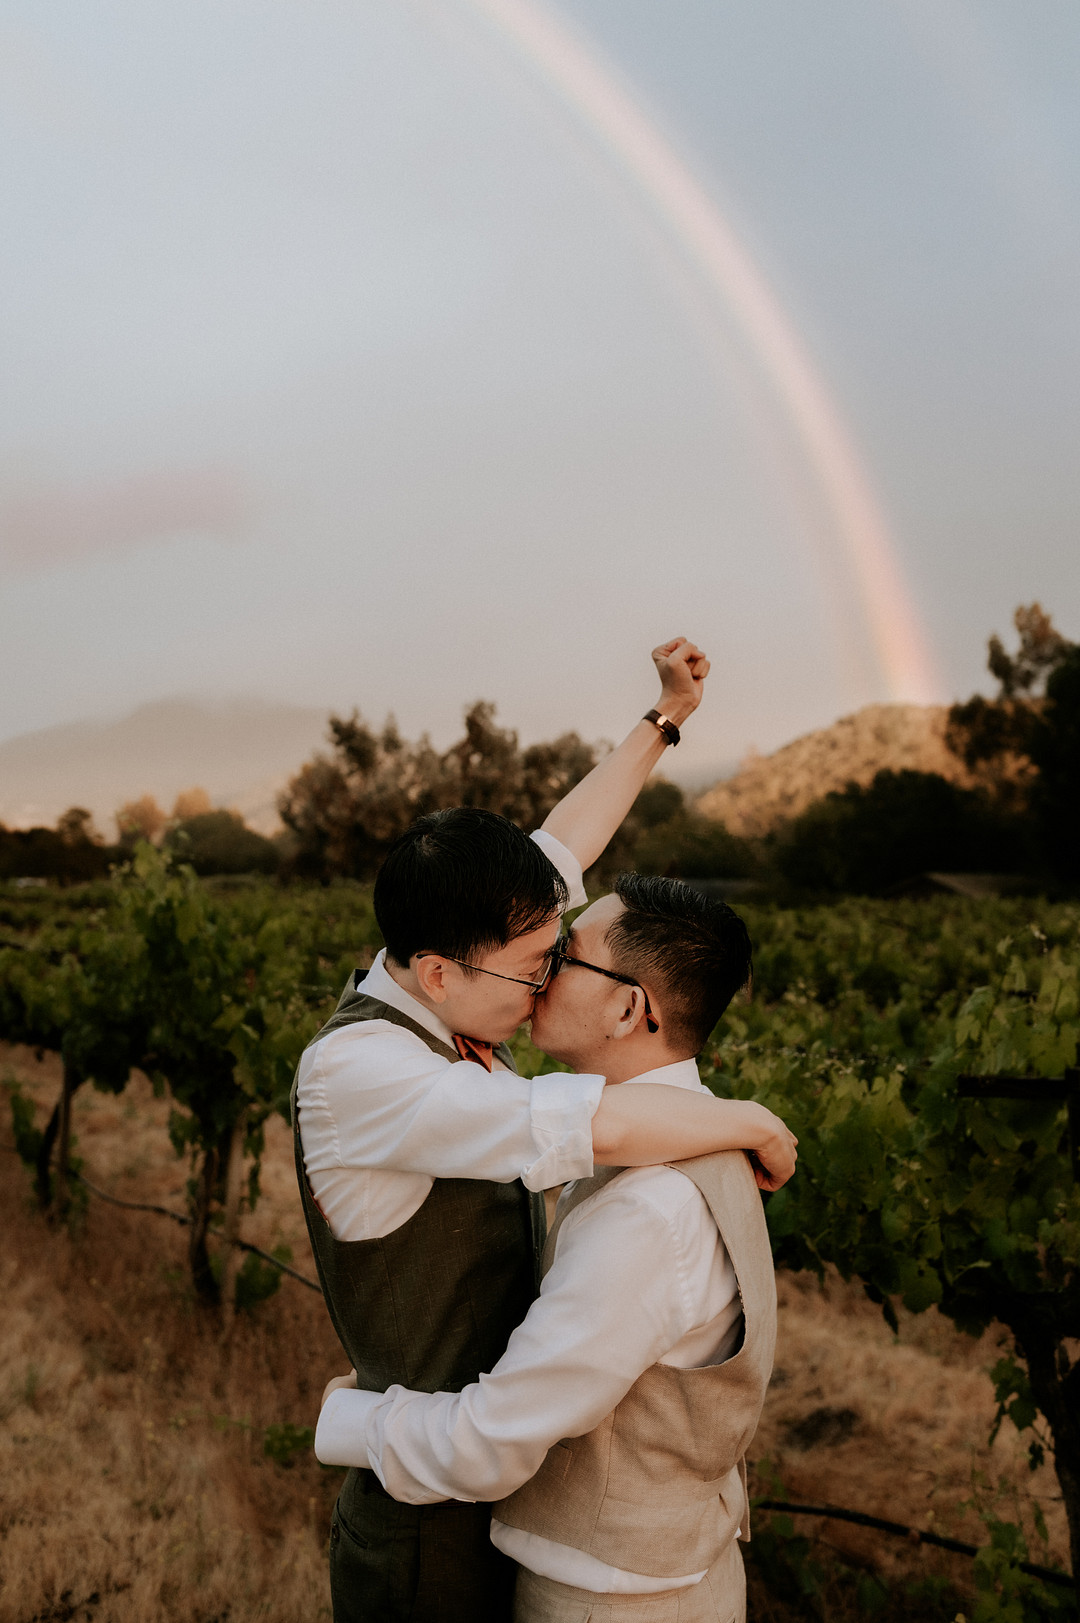 Asian grooms kiss while one holds his fist in the air. There's a rainbow behind them.